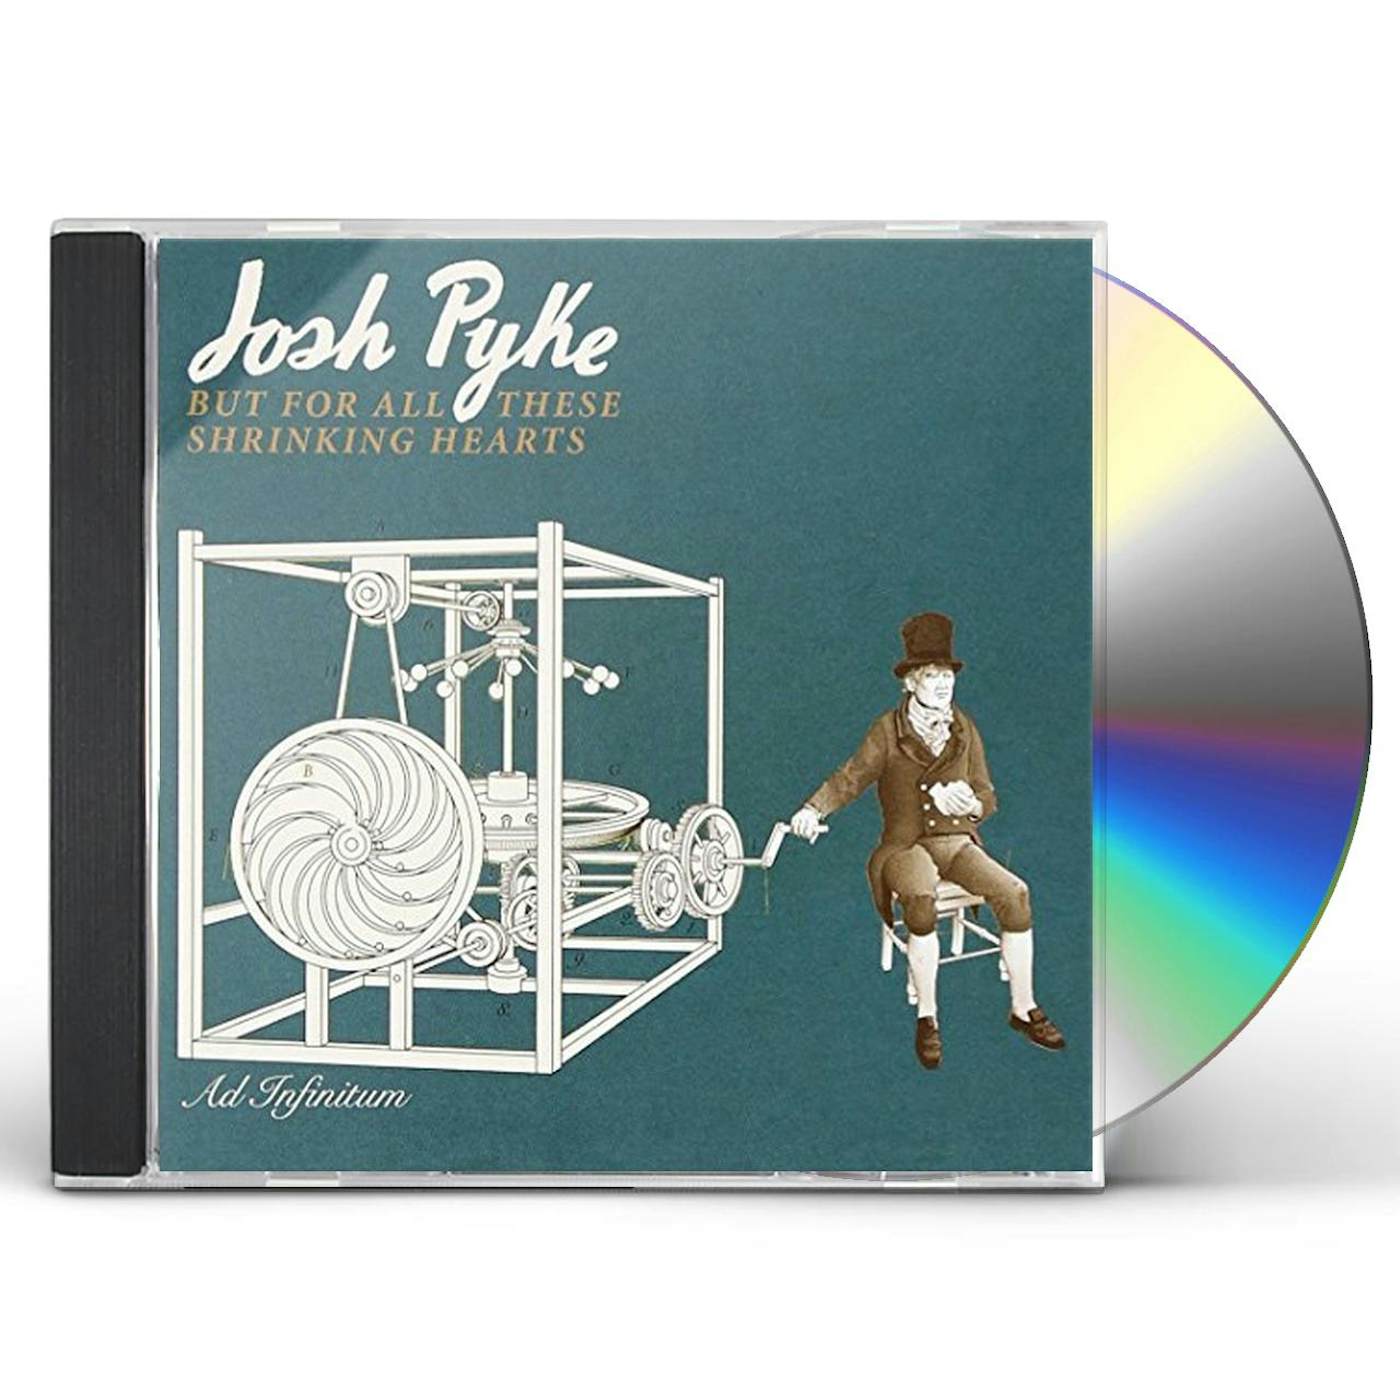 Josh Pyke BUT FOR ALL THESE SHRINKING HEARTS (DELUXE EDITION CD